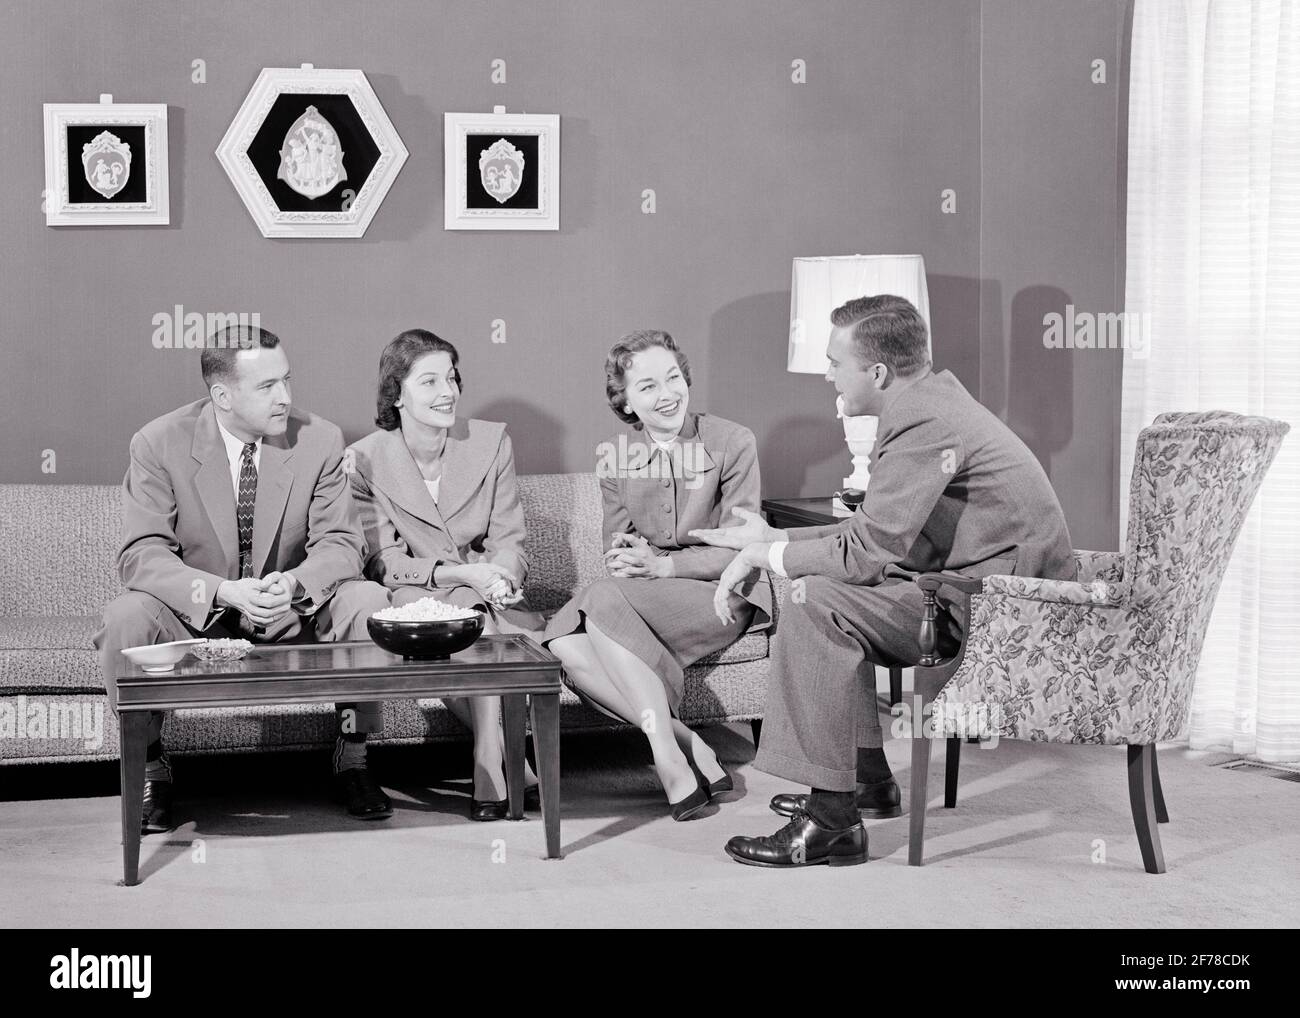 1950s TWO COUPLES SITTING LIVING ROOM TALKING SMILING SOCIAL GATHERING CONVERSATION SNACKS ON COFFEE TABLE - s7515 HAR001 HARS NOSTALGIA OLD FASHION CONVERSATION COUCH STYLE COMMUNICATION FRIEND PLEASED JOY LIFESTYLE FEMALES MARRIED SPOUSE HUSBANDS HOME LIFE COPY SPACE FRIENDSHIP HALF-LENGTH LADIES PERSONS MALES B&W GATHERING PARTNER SNACKS SUIT AND TIE CHEERFUL LEISURE SMILES FRIENDLY JOYFUL STYLISH GET-TOGETHER INFORMAL MID-ADULT MID-ADULT MAN MID-ADULT WOMAN TOGETHERNESS WIVES BLACK AND WHITE CAUCASIAN ETHNICITY HAR001 OLD FASHIONED Stock Photo